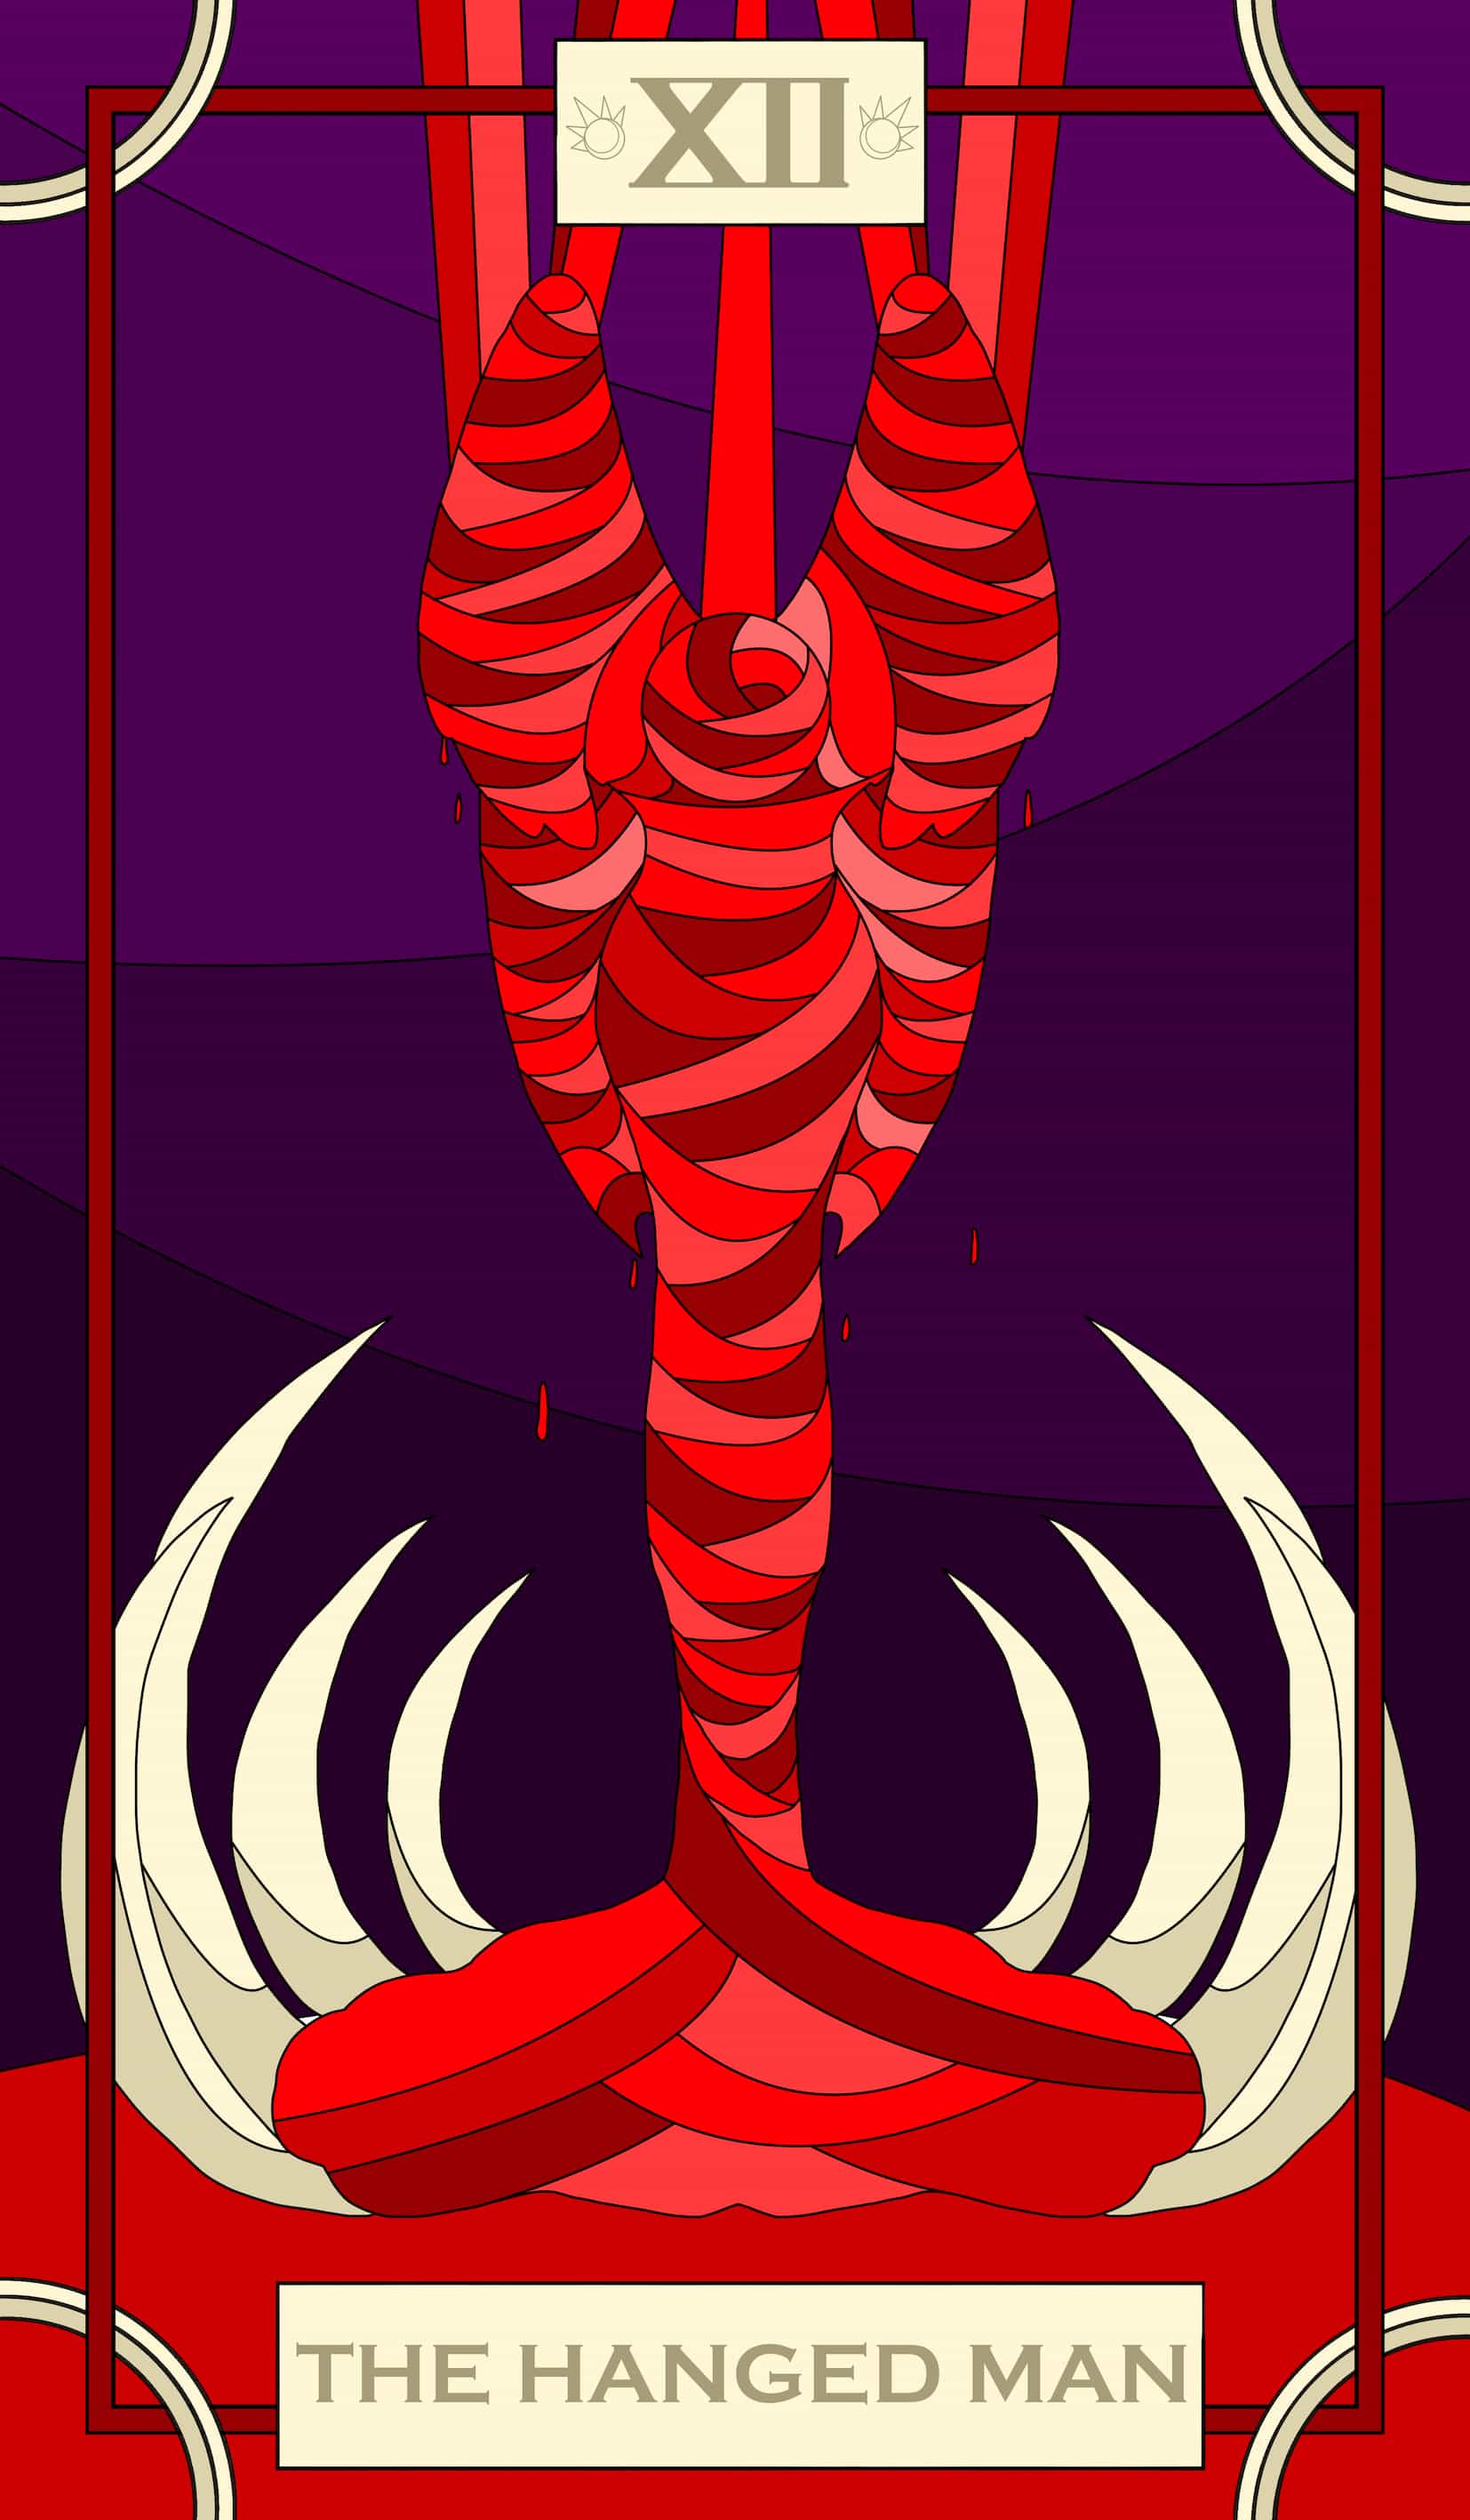 A tarot card depicting a God bound in blood vessels suspended over ribs and gore